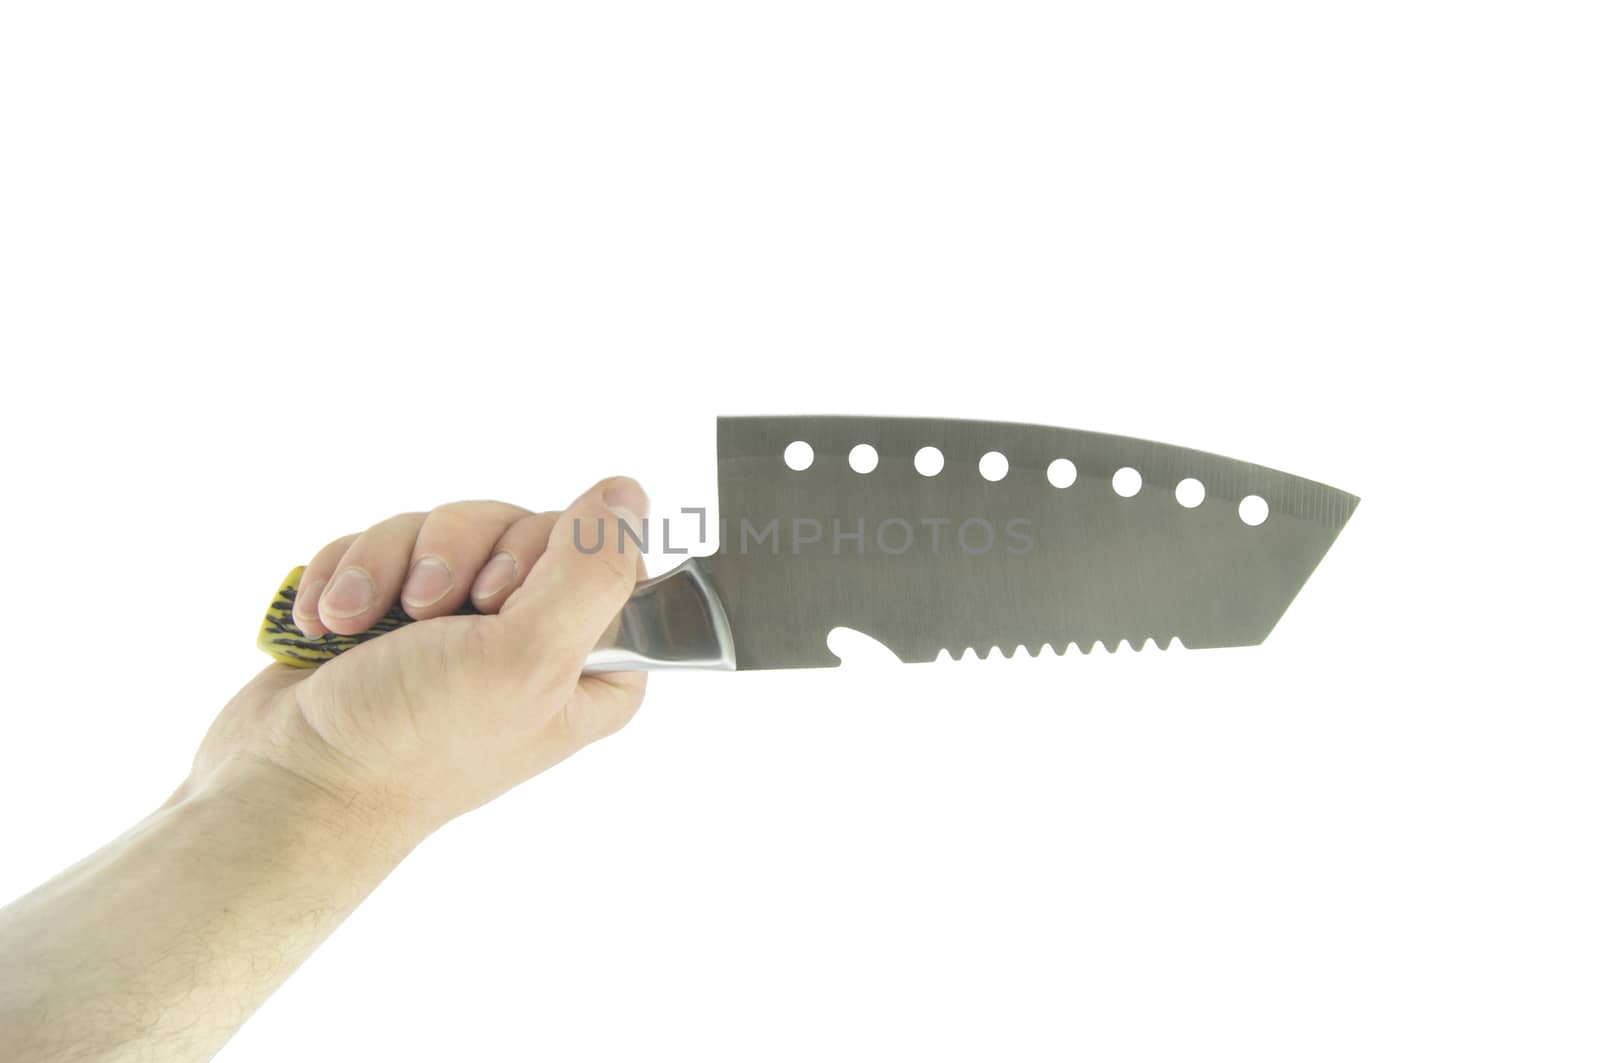 knife in hand isolated on a white background. For your commercial and editorial use